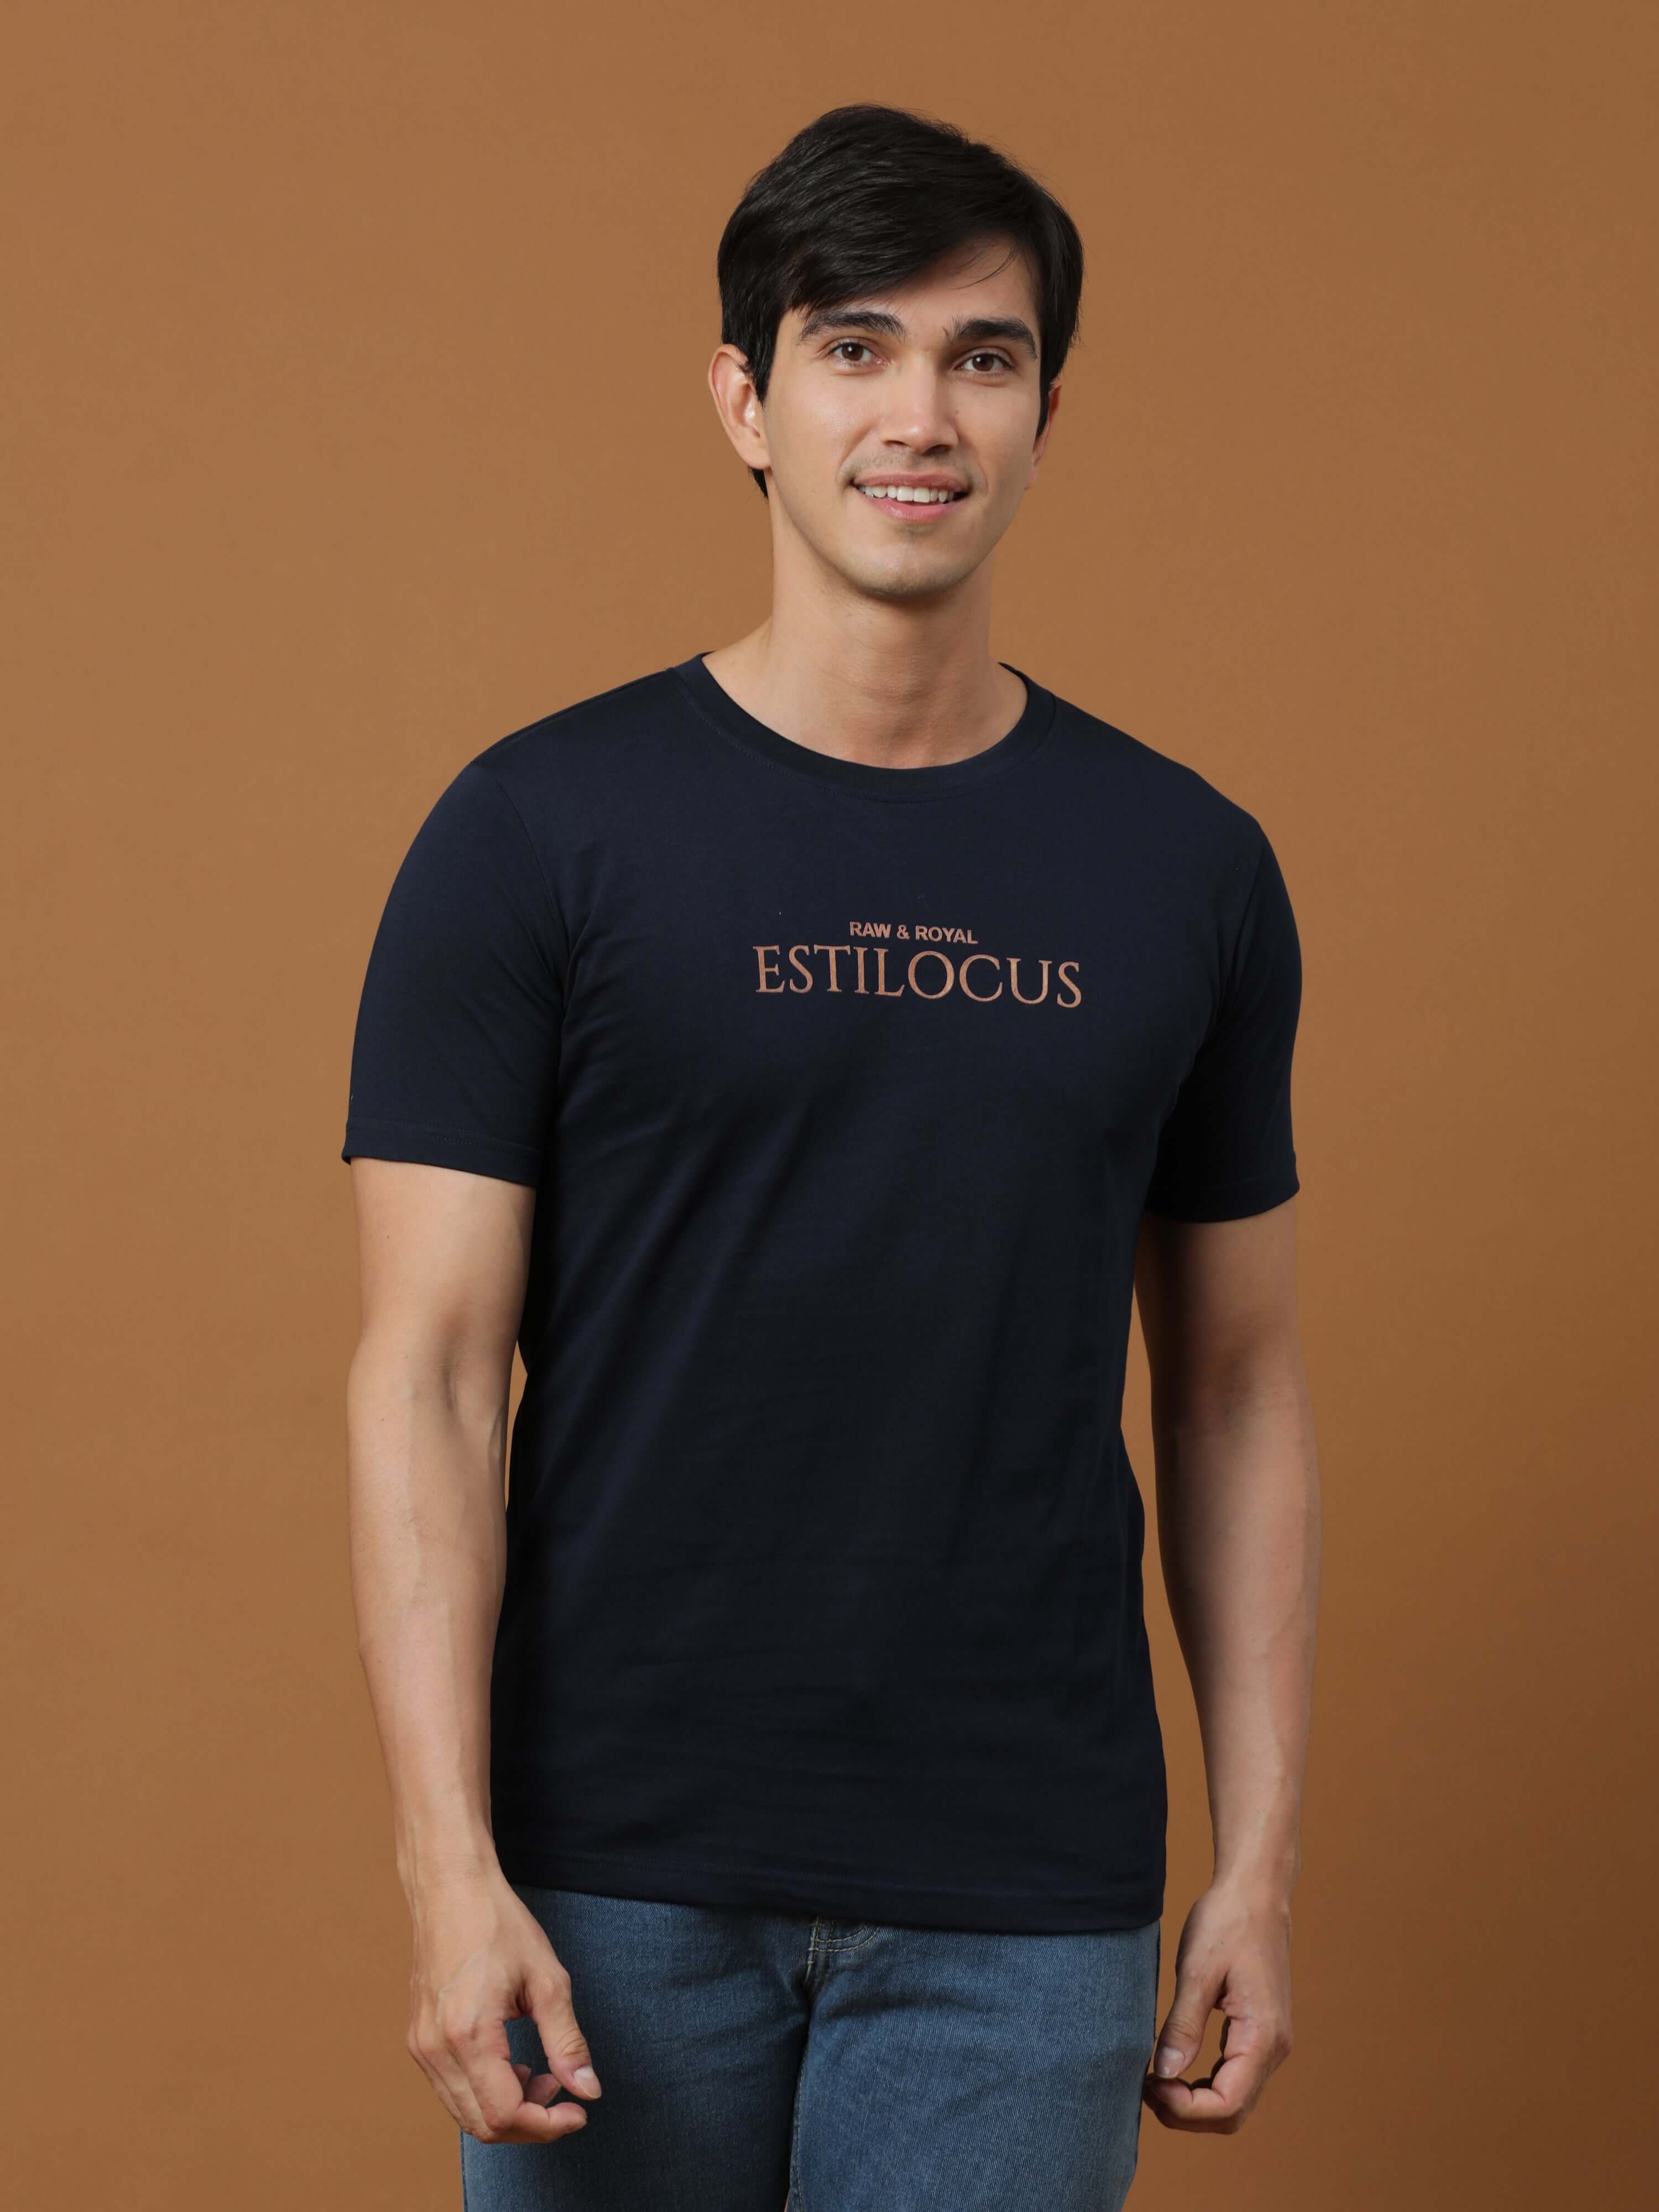 Estilocus Navy Printed T Shirt shop online at Estilocus. 100% Cotton Designed and printed on knitted fabric. The fabric is stretchy and lightweight, with a soft skin feel and no wrinkles. Crew neck collar which is smooth on the neck and keeps you comforta